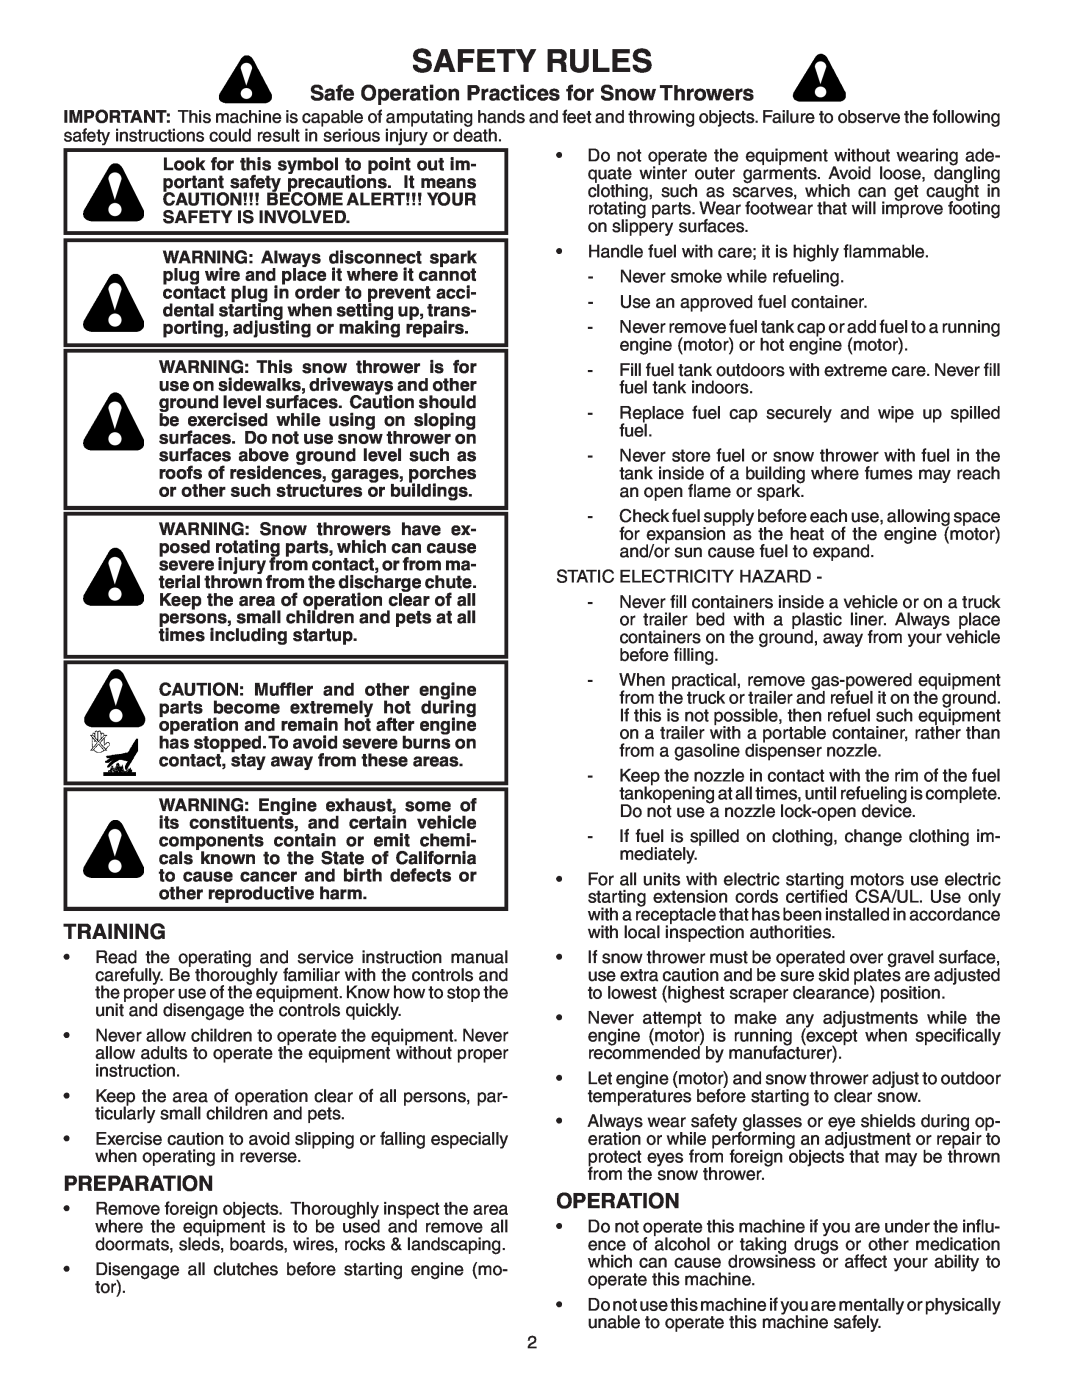 Poulan 189645 owner manual Safety Rules, Safe Operation Practices for Snow Throwers, Training, Preparation 